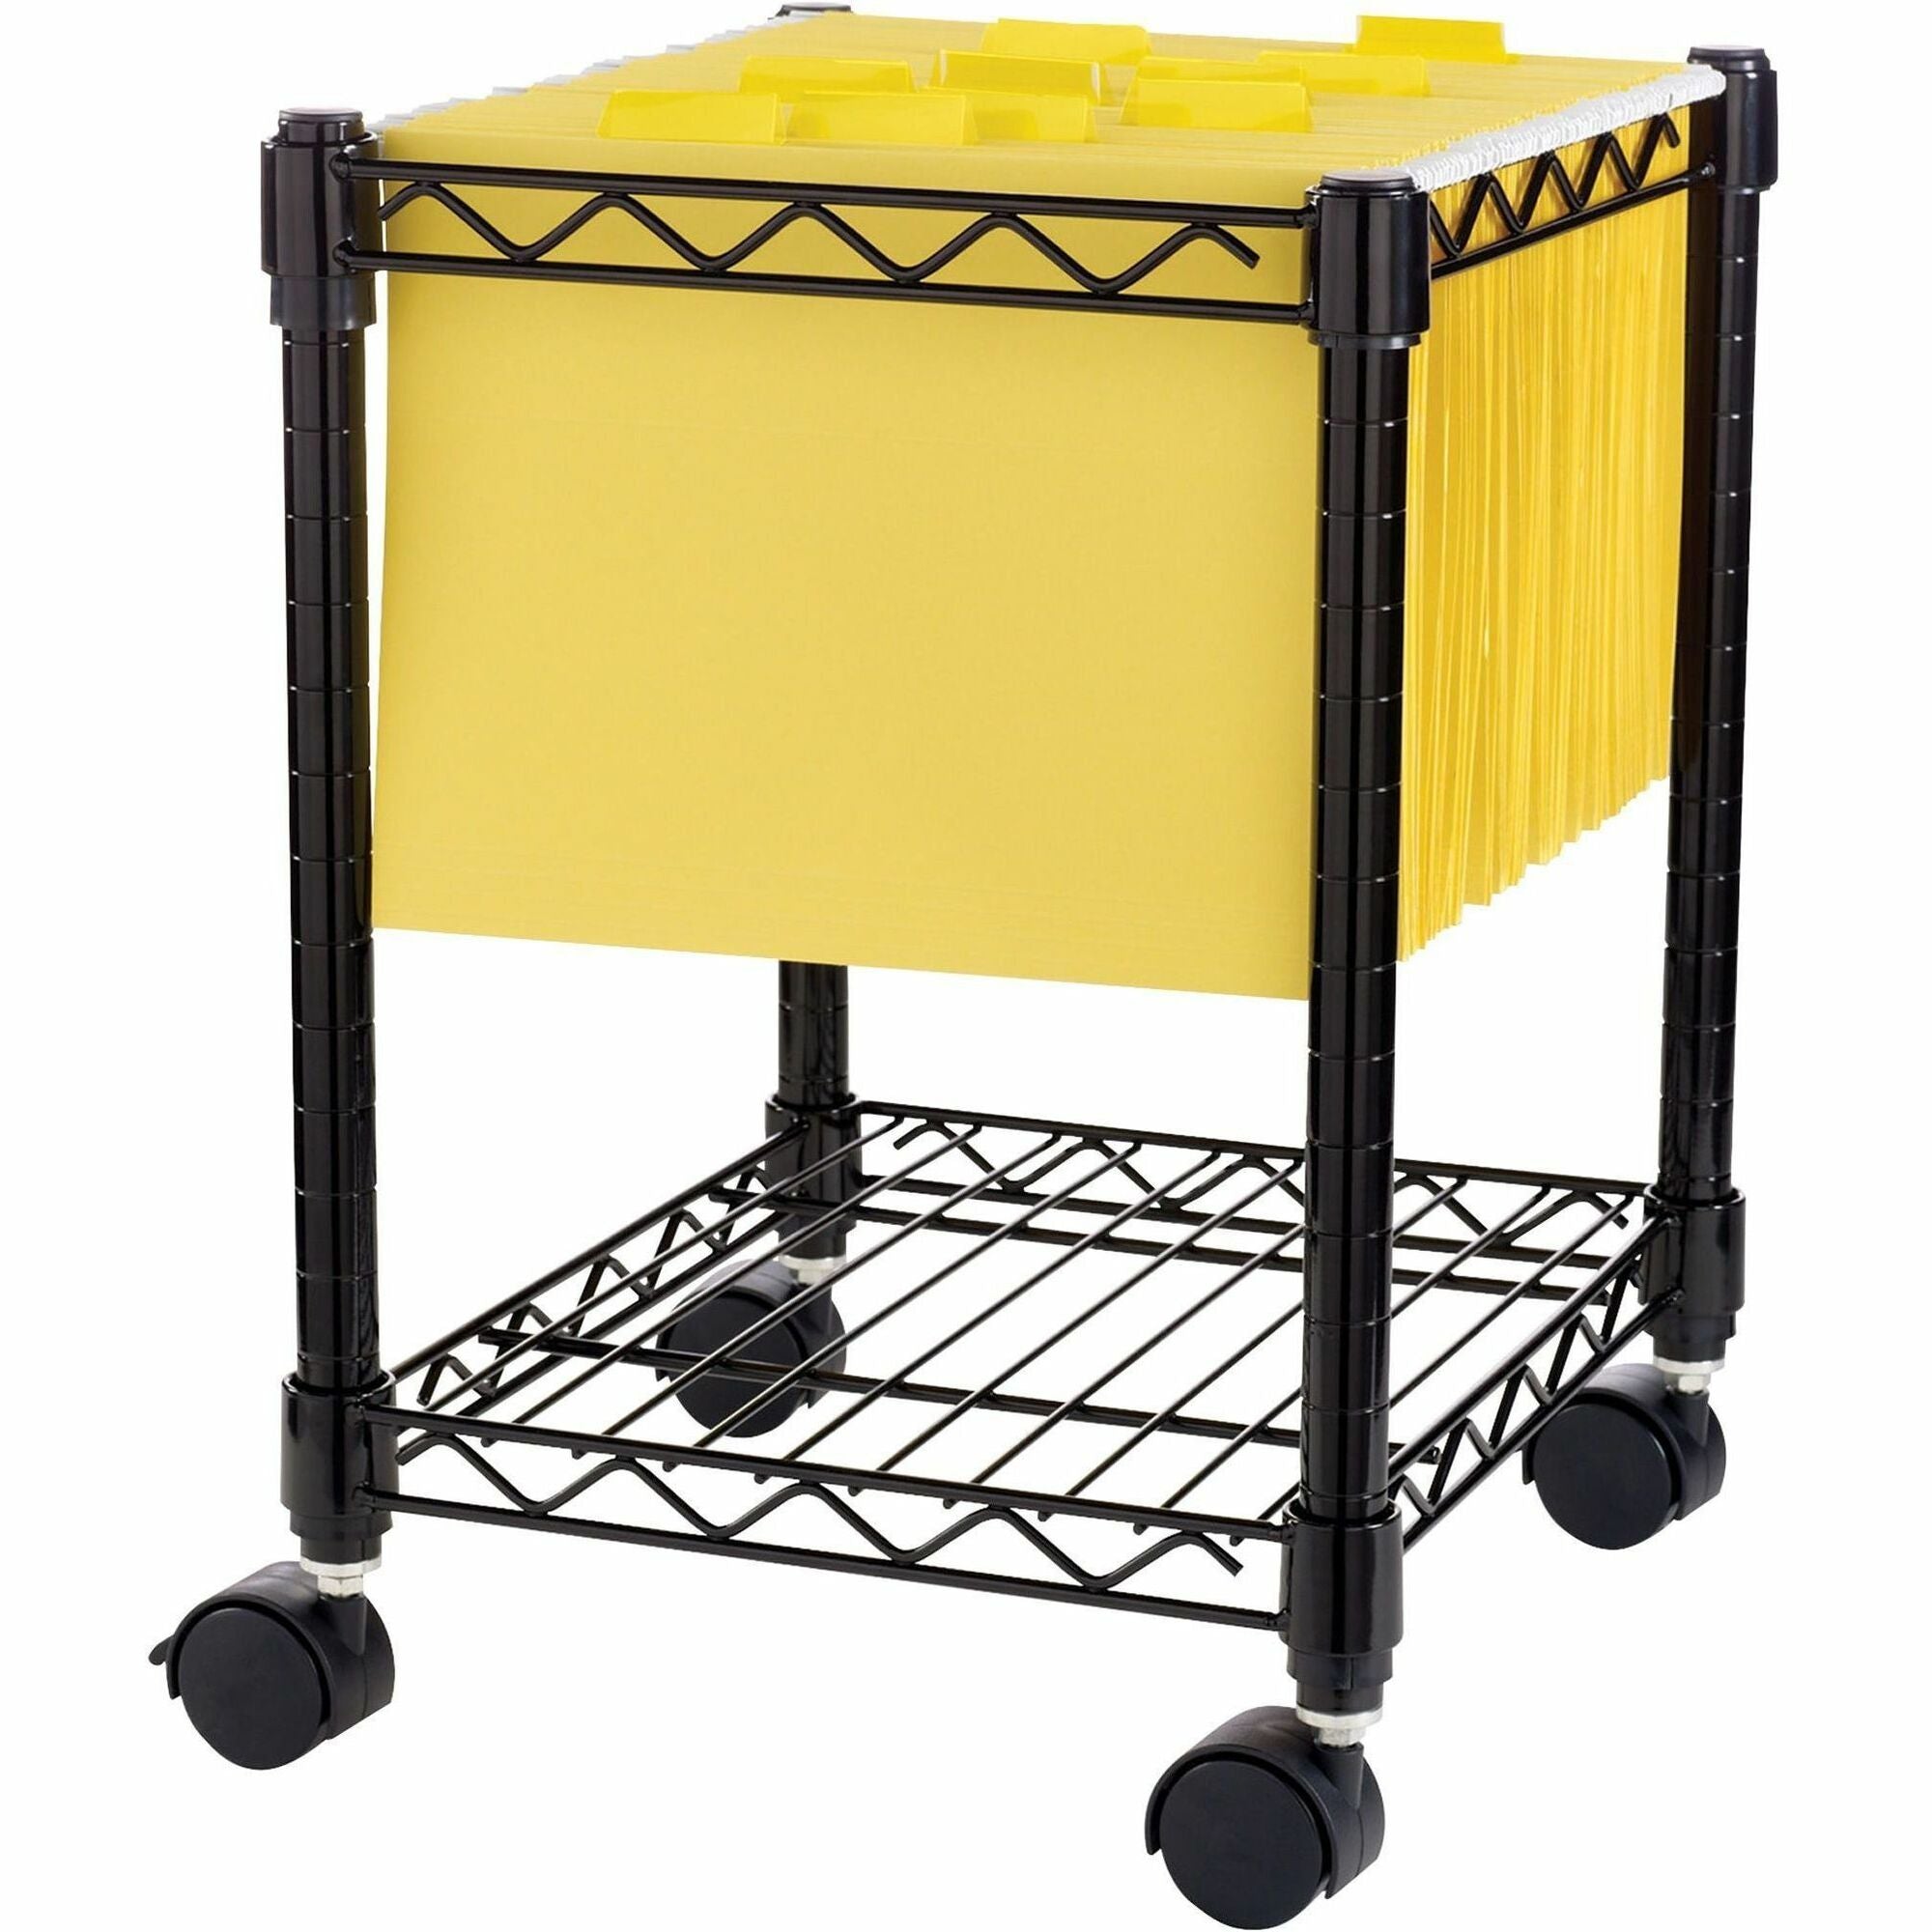 nusparc-compact-mobile-cart-4-casters-x-155-width-x-14-depth-x-195-height-metal-frame-black-1-each_nprct100zzbk - 1